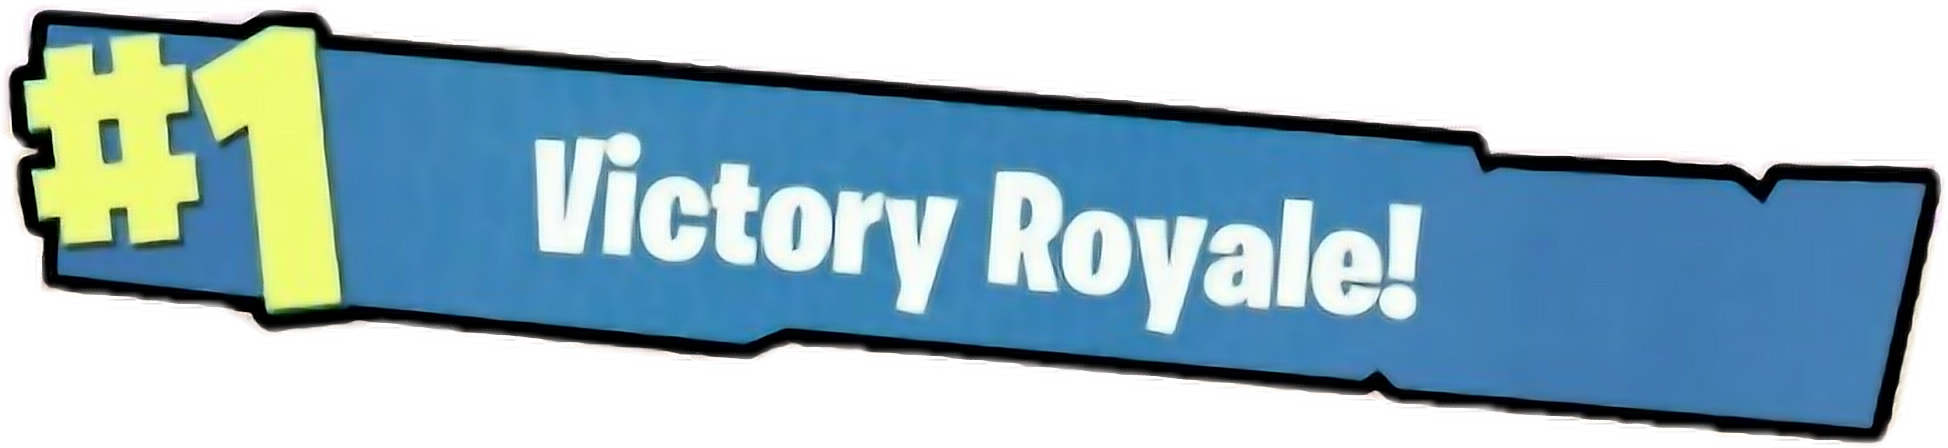 Number1 Victory Royale Banner PNG